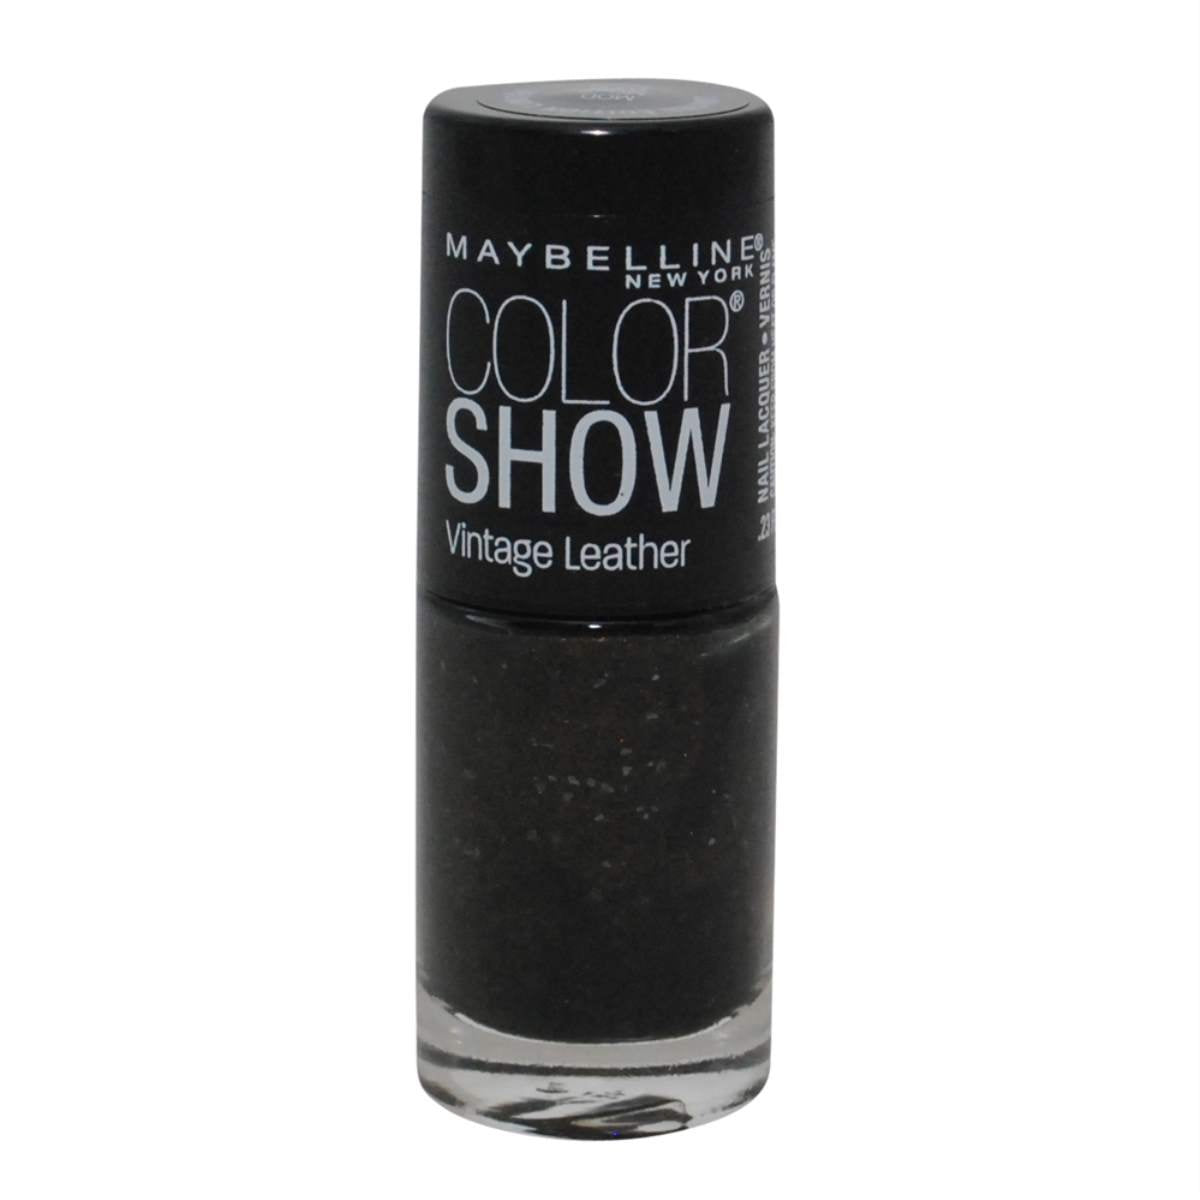 NEW Maybelline Color Show Vintage Leather Nail Polish - 875 Mod Moss